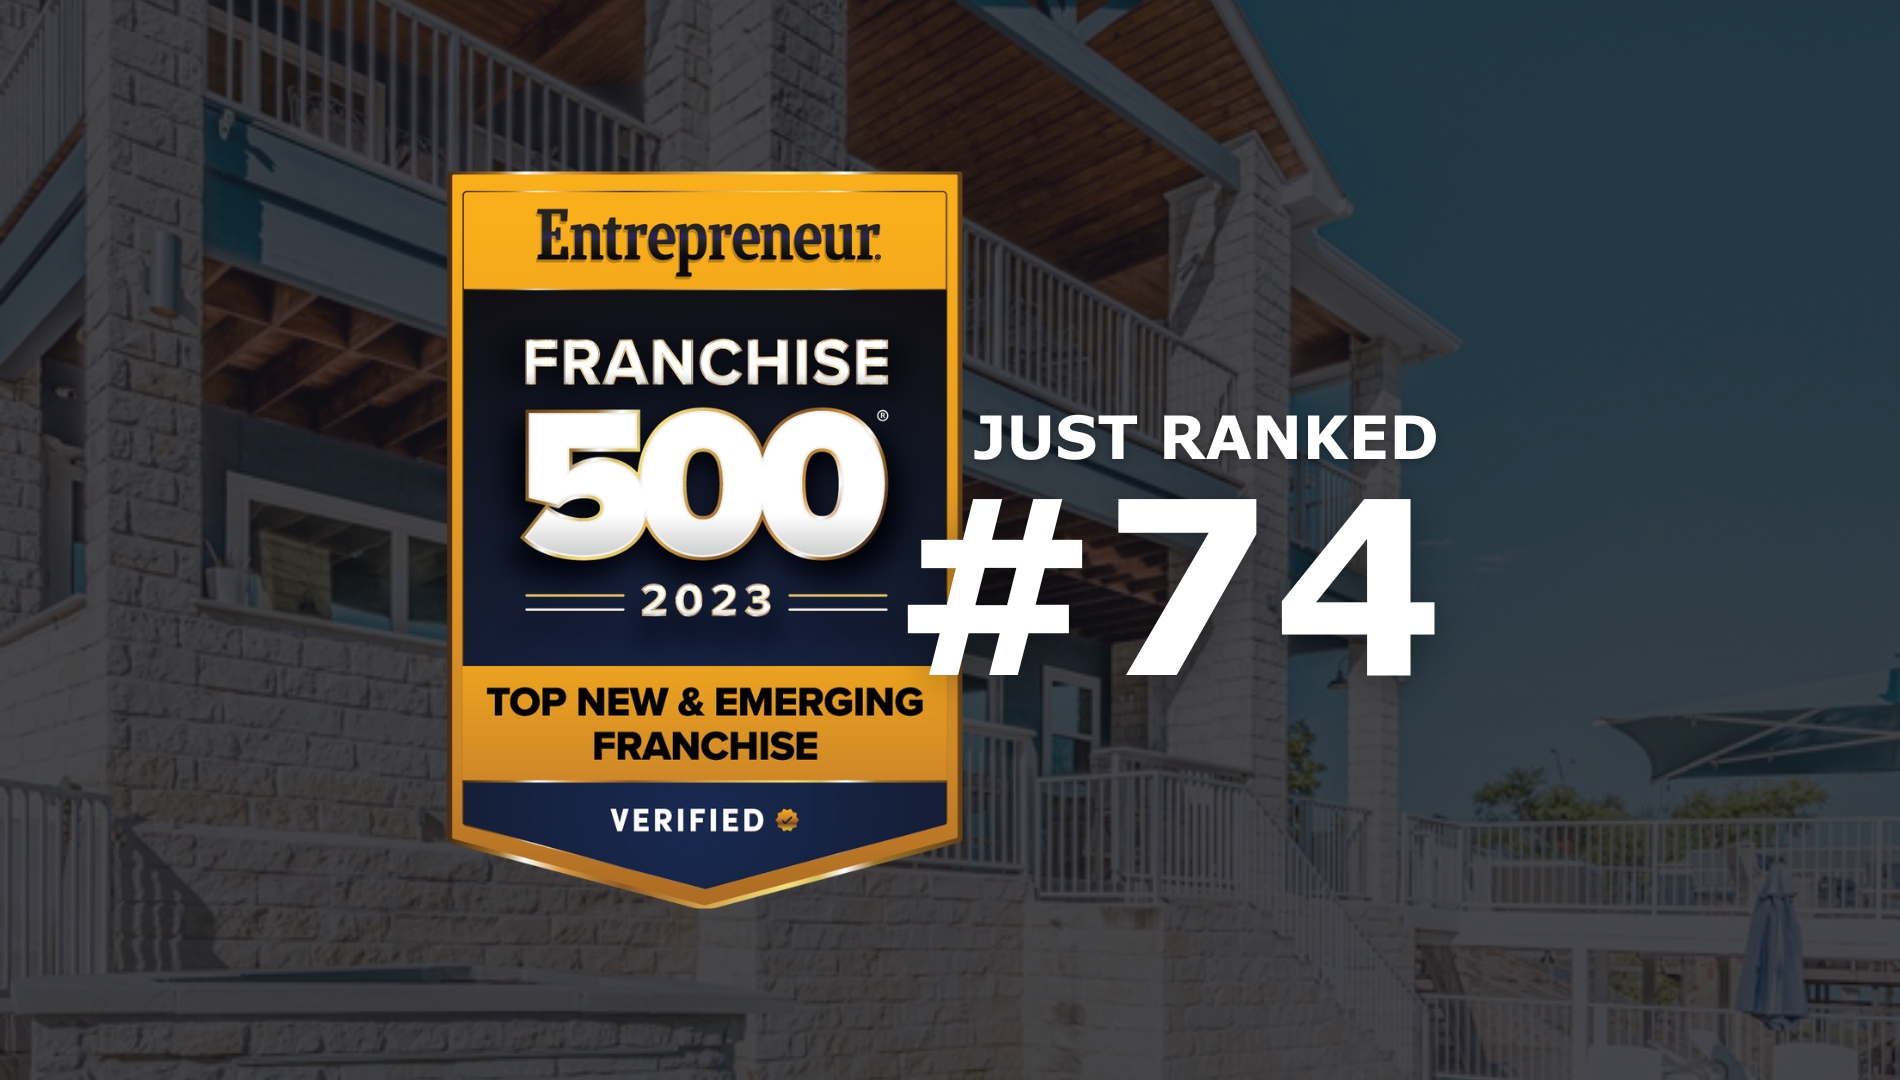 Grand Welcome Named a Top New and Emerging Franchise in 2023 by Entrepreneur